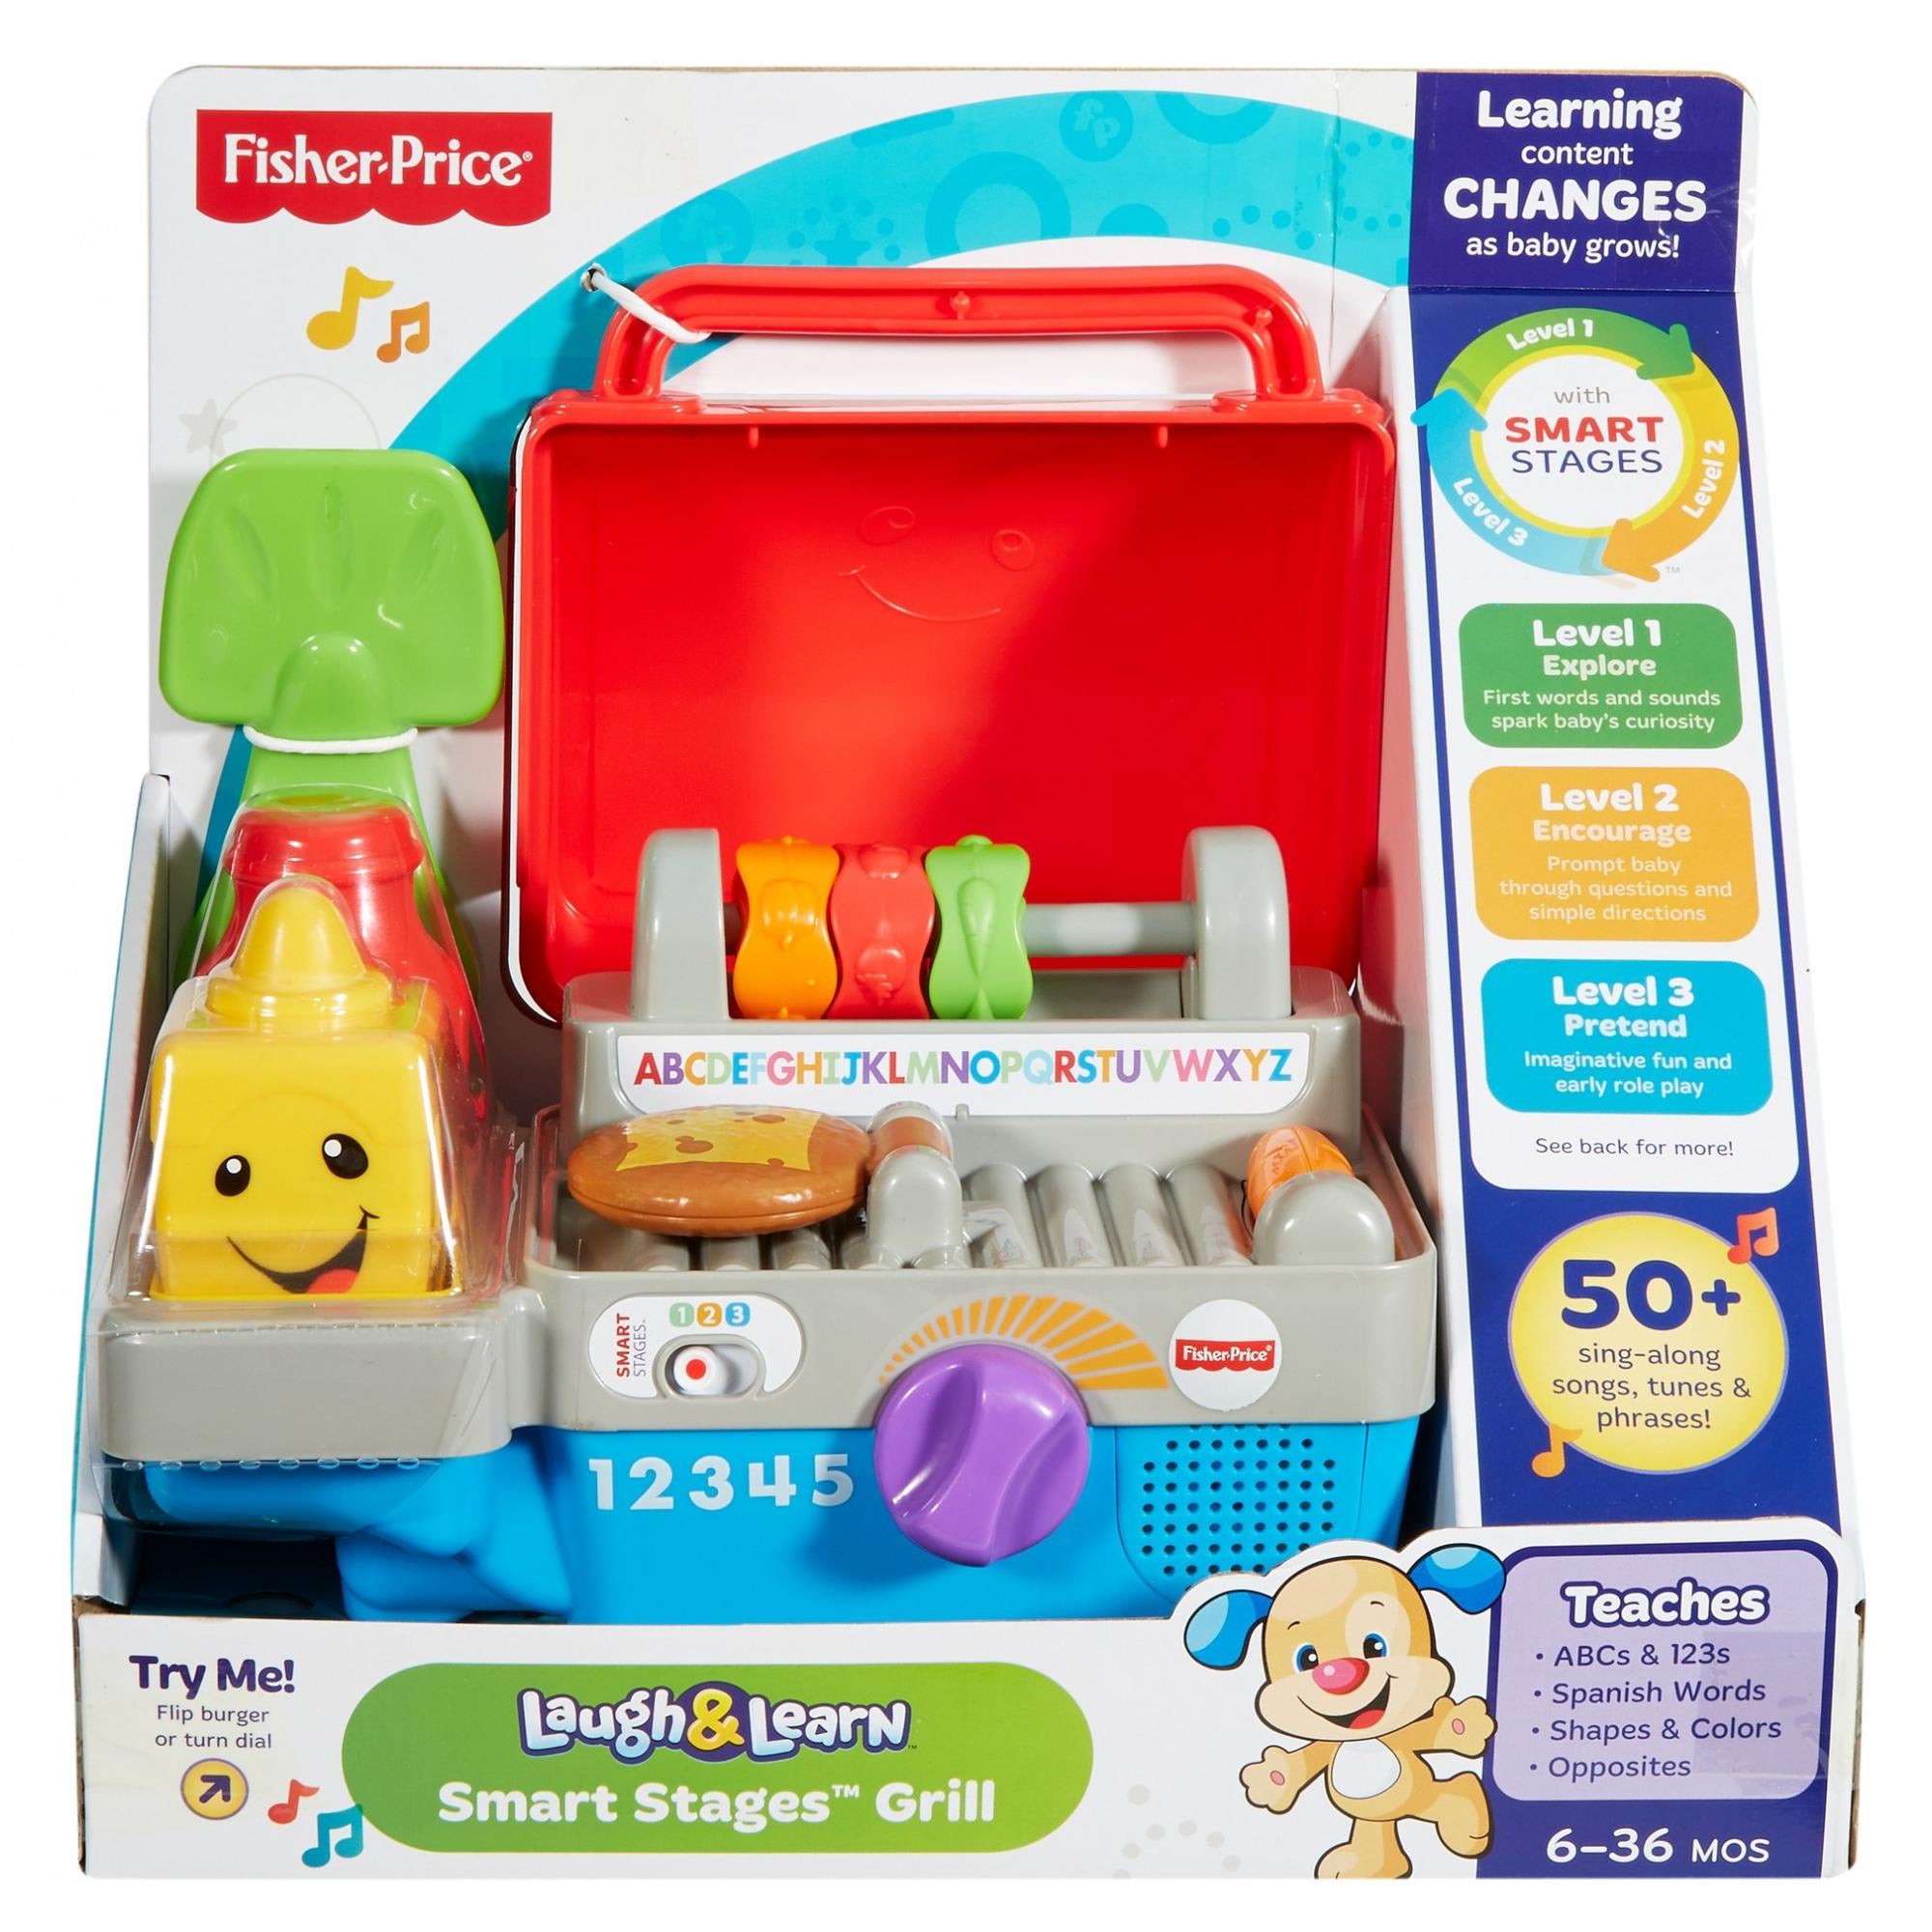 fisher price grill